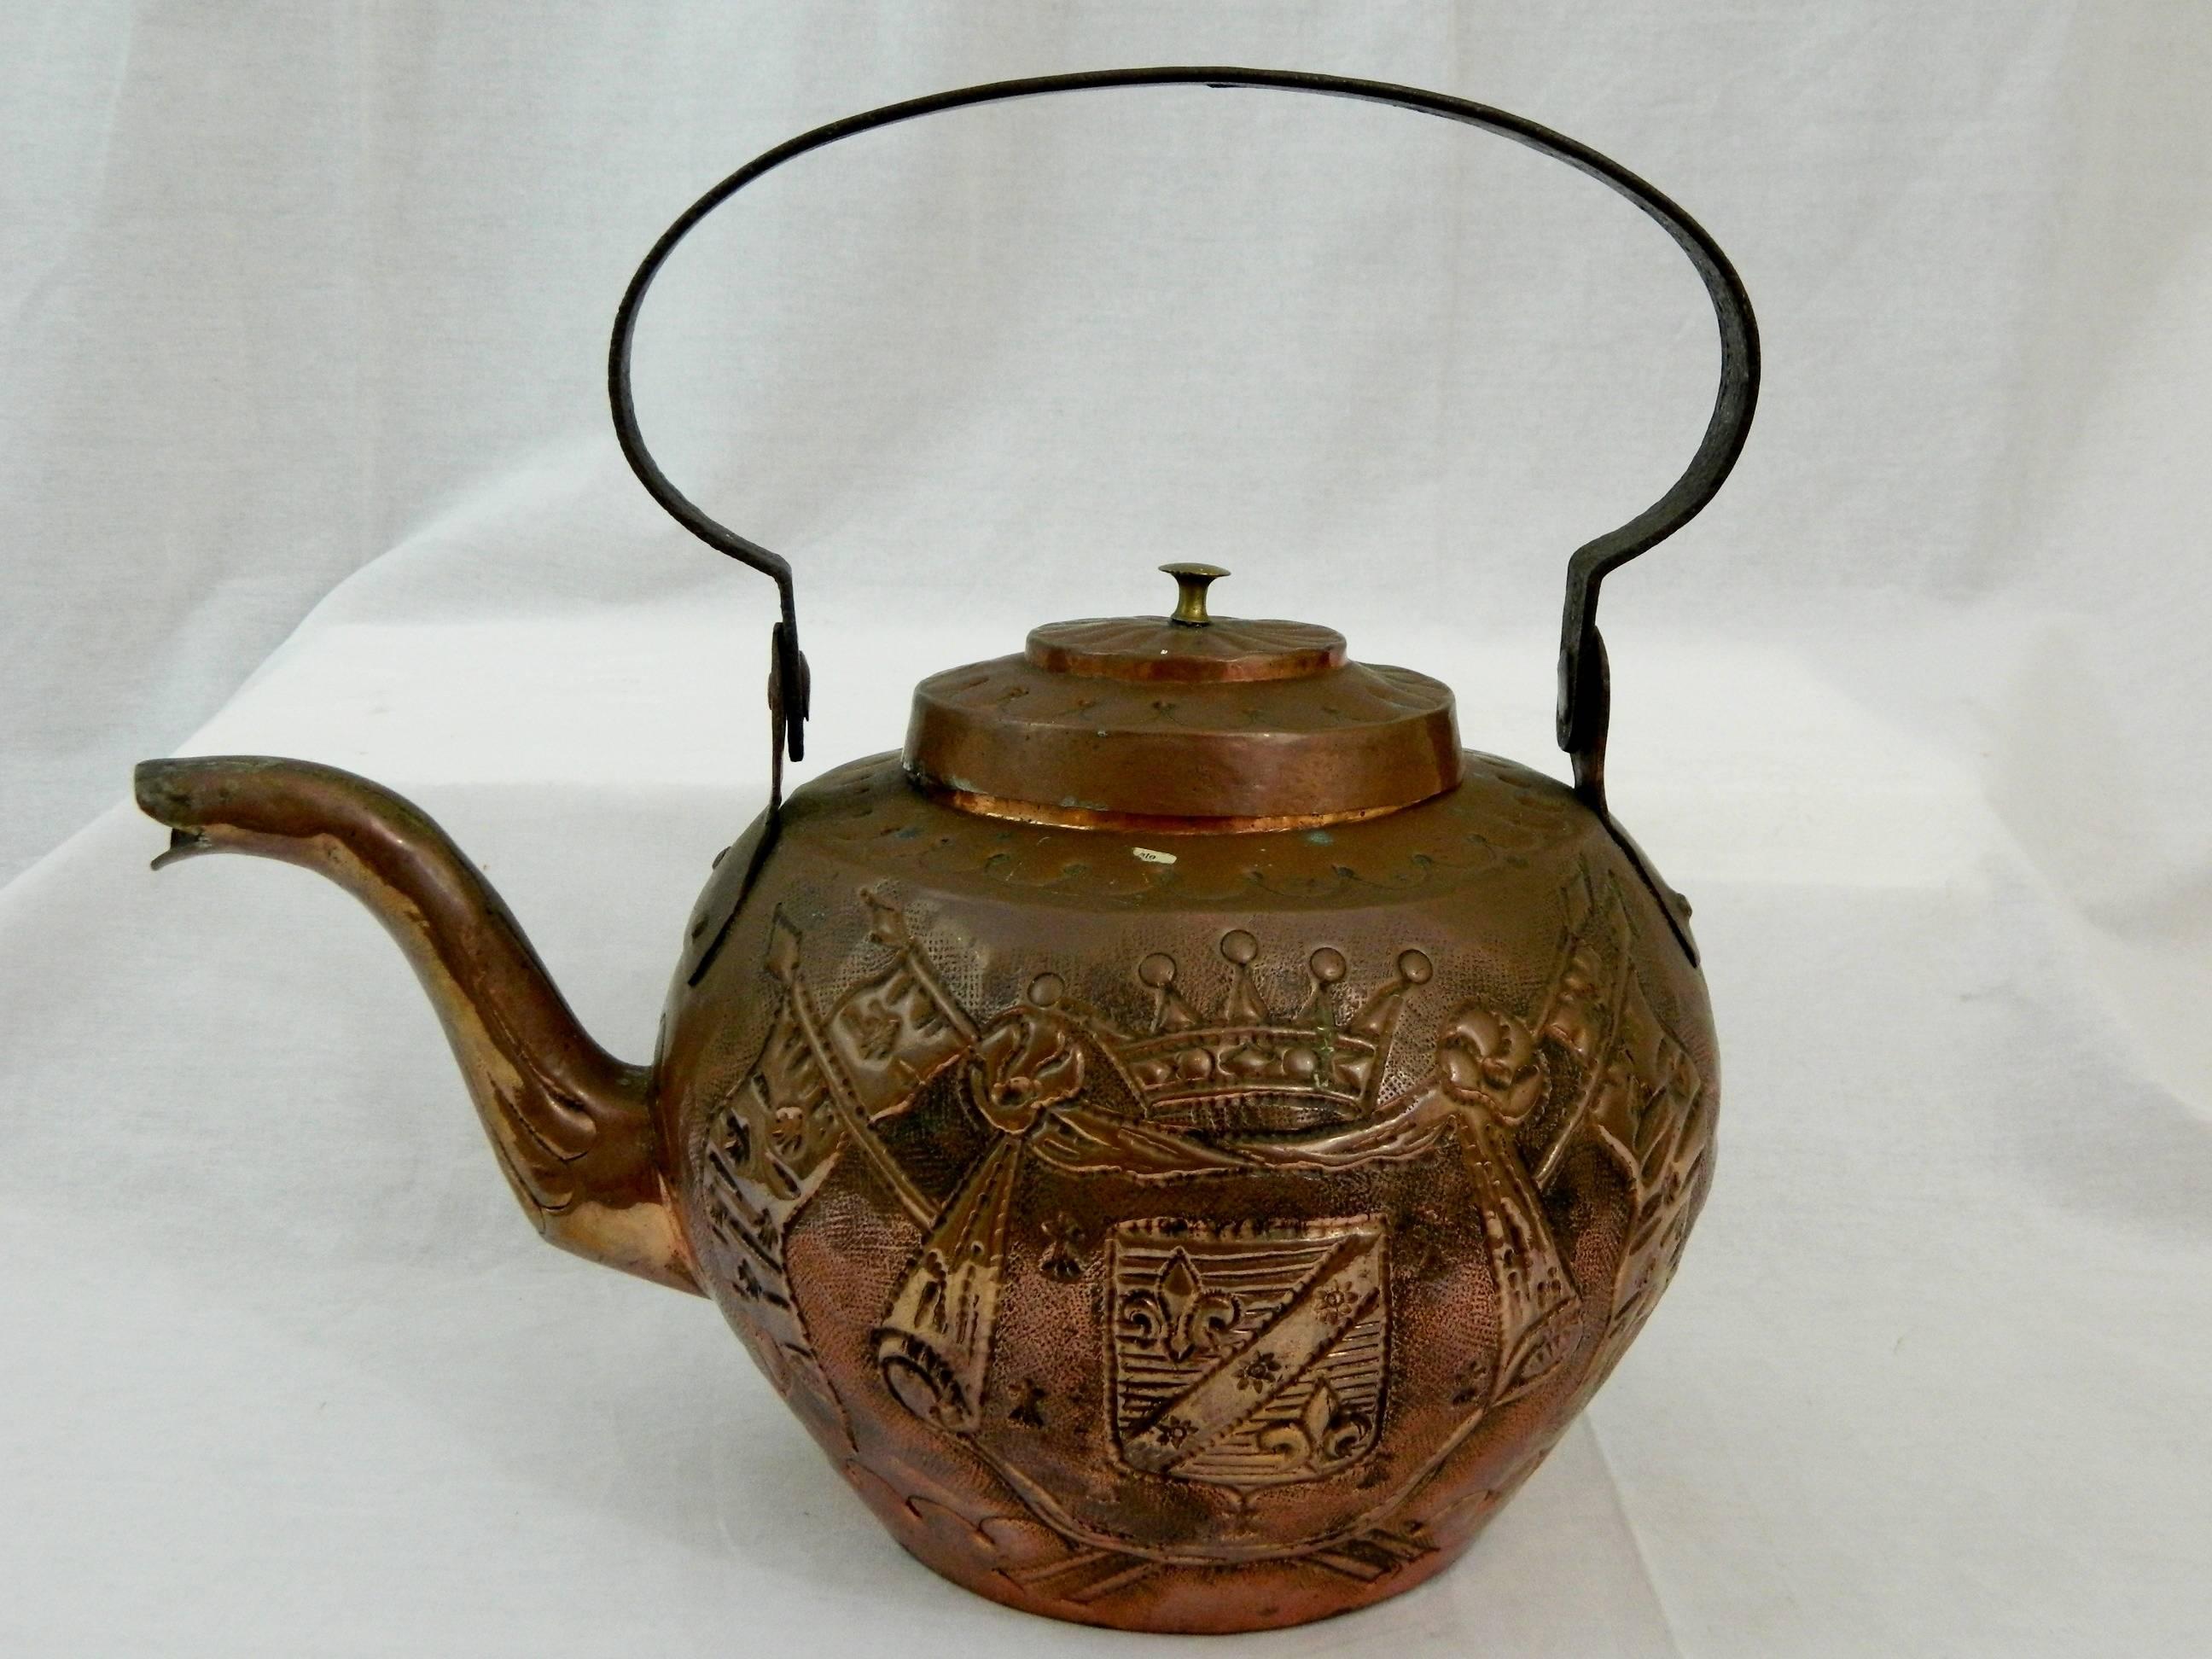 French copper kettle or pot, 19th century. Kettle is beautifully decorated with scrolls, leaves and a fleur de lys.